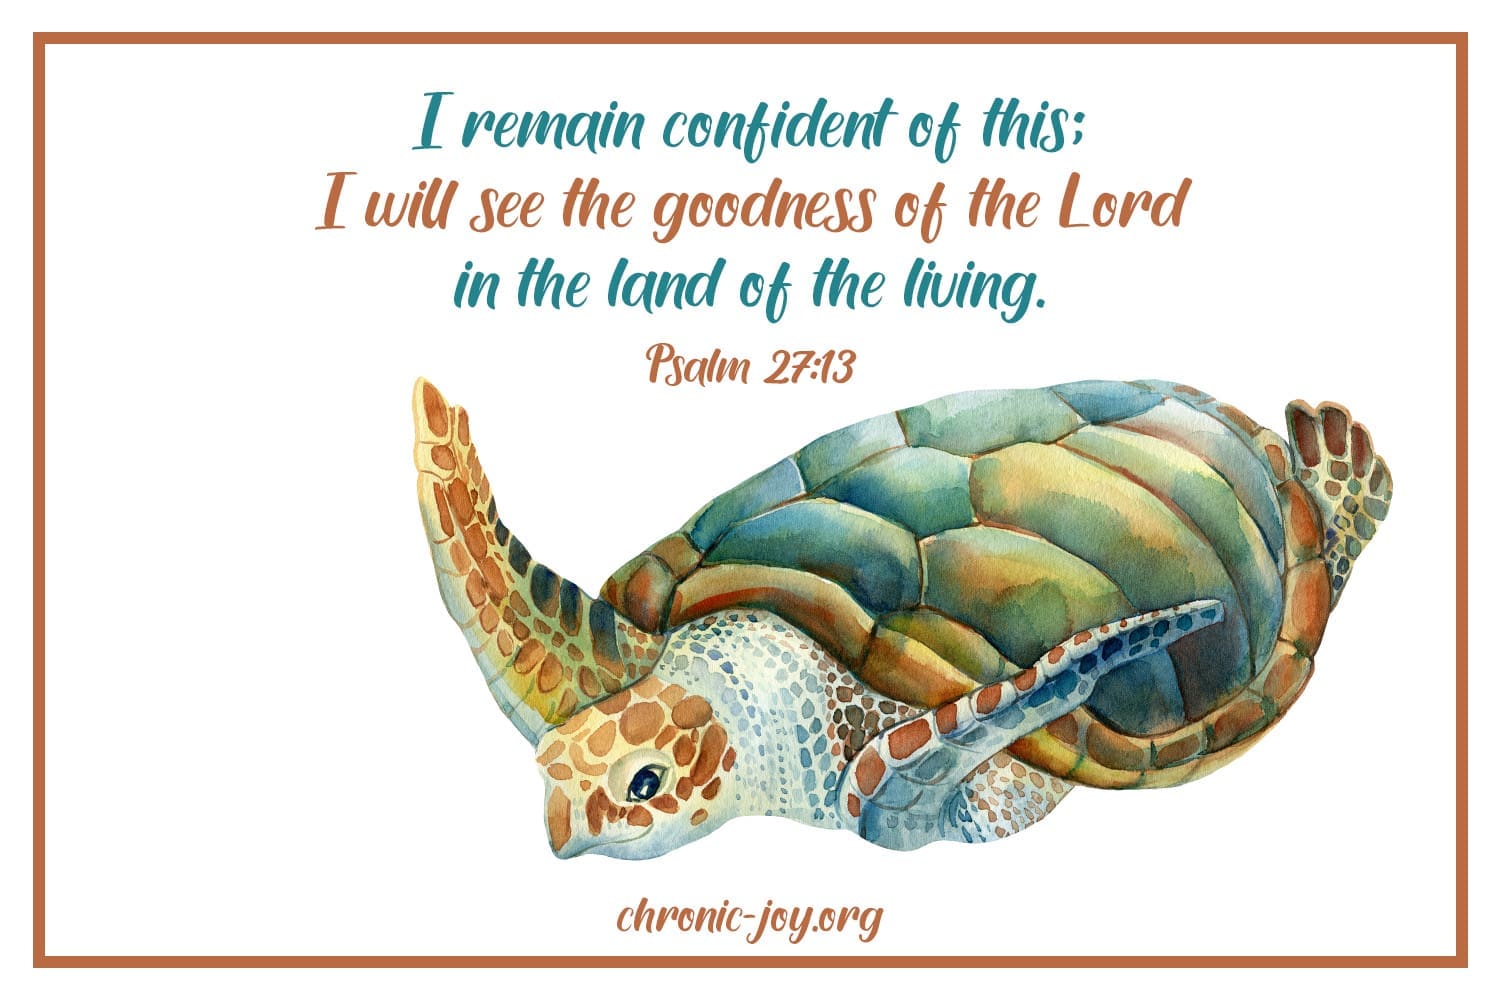 "I remain confident of this; I will see the goodness of the Lord in the land of the living." Psalm 27:13